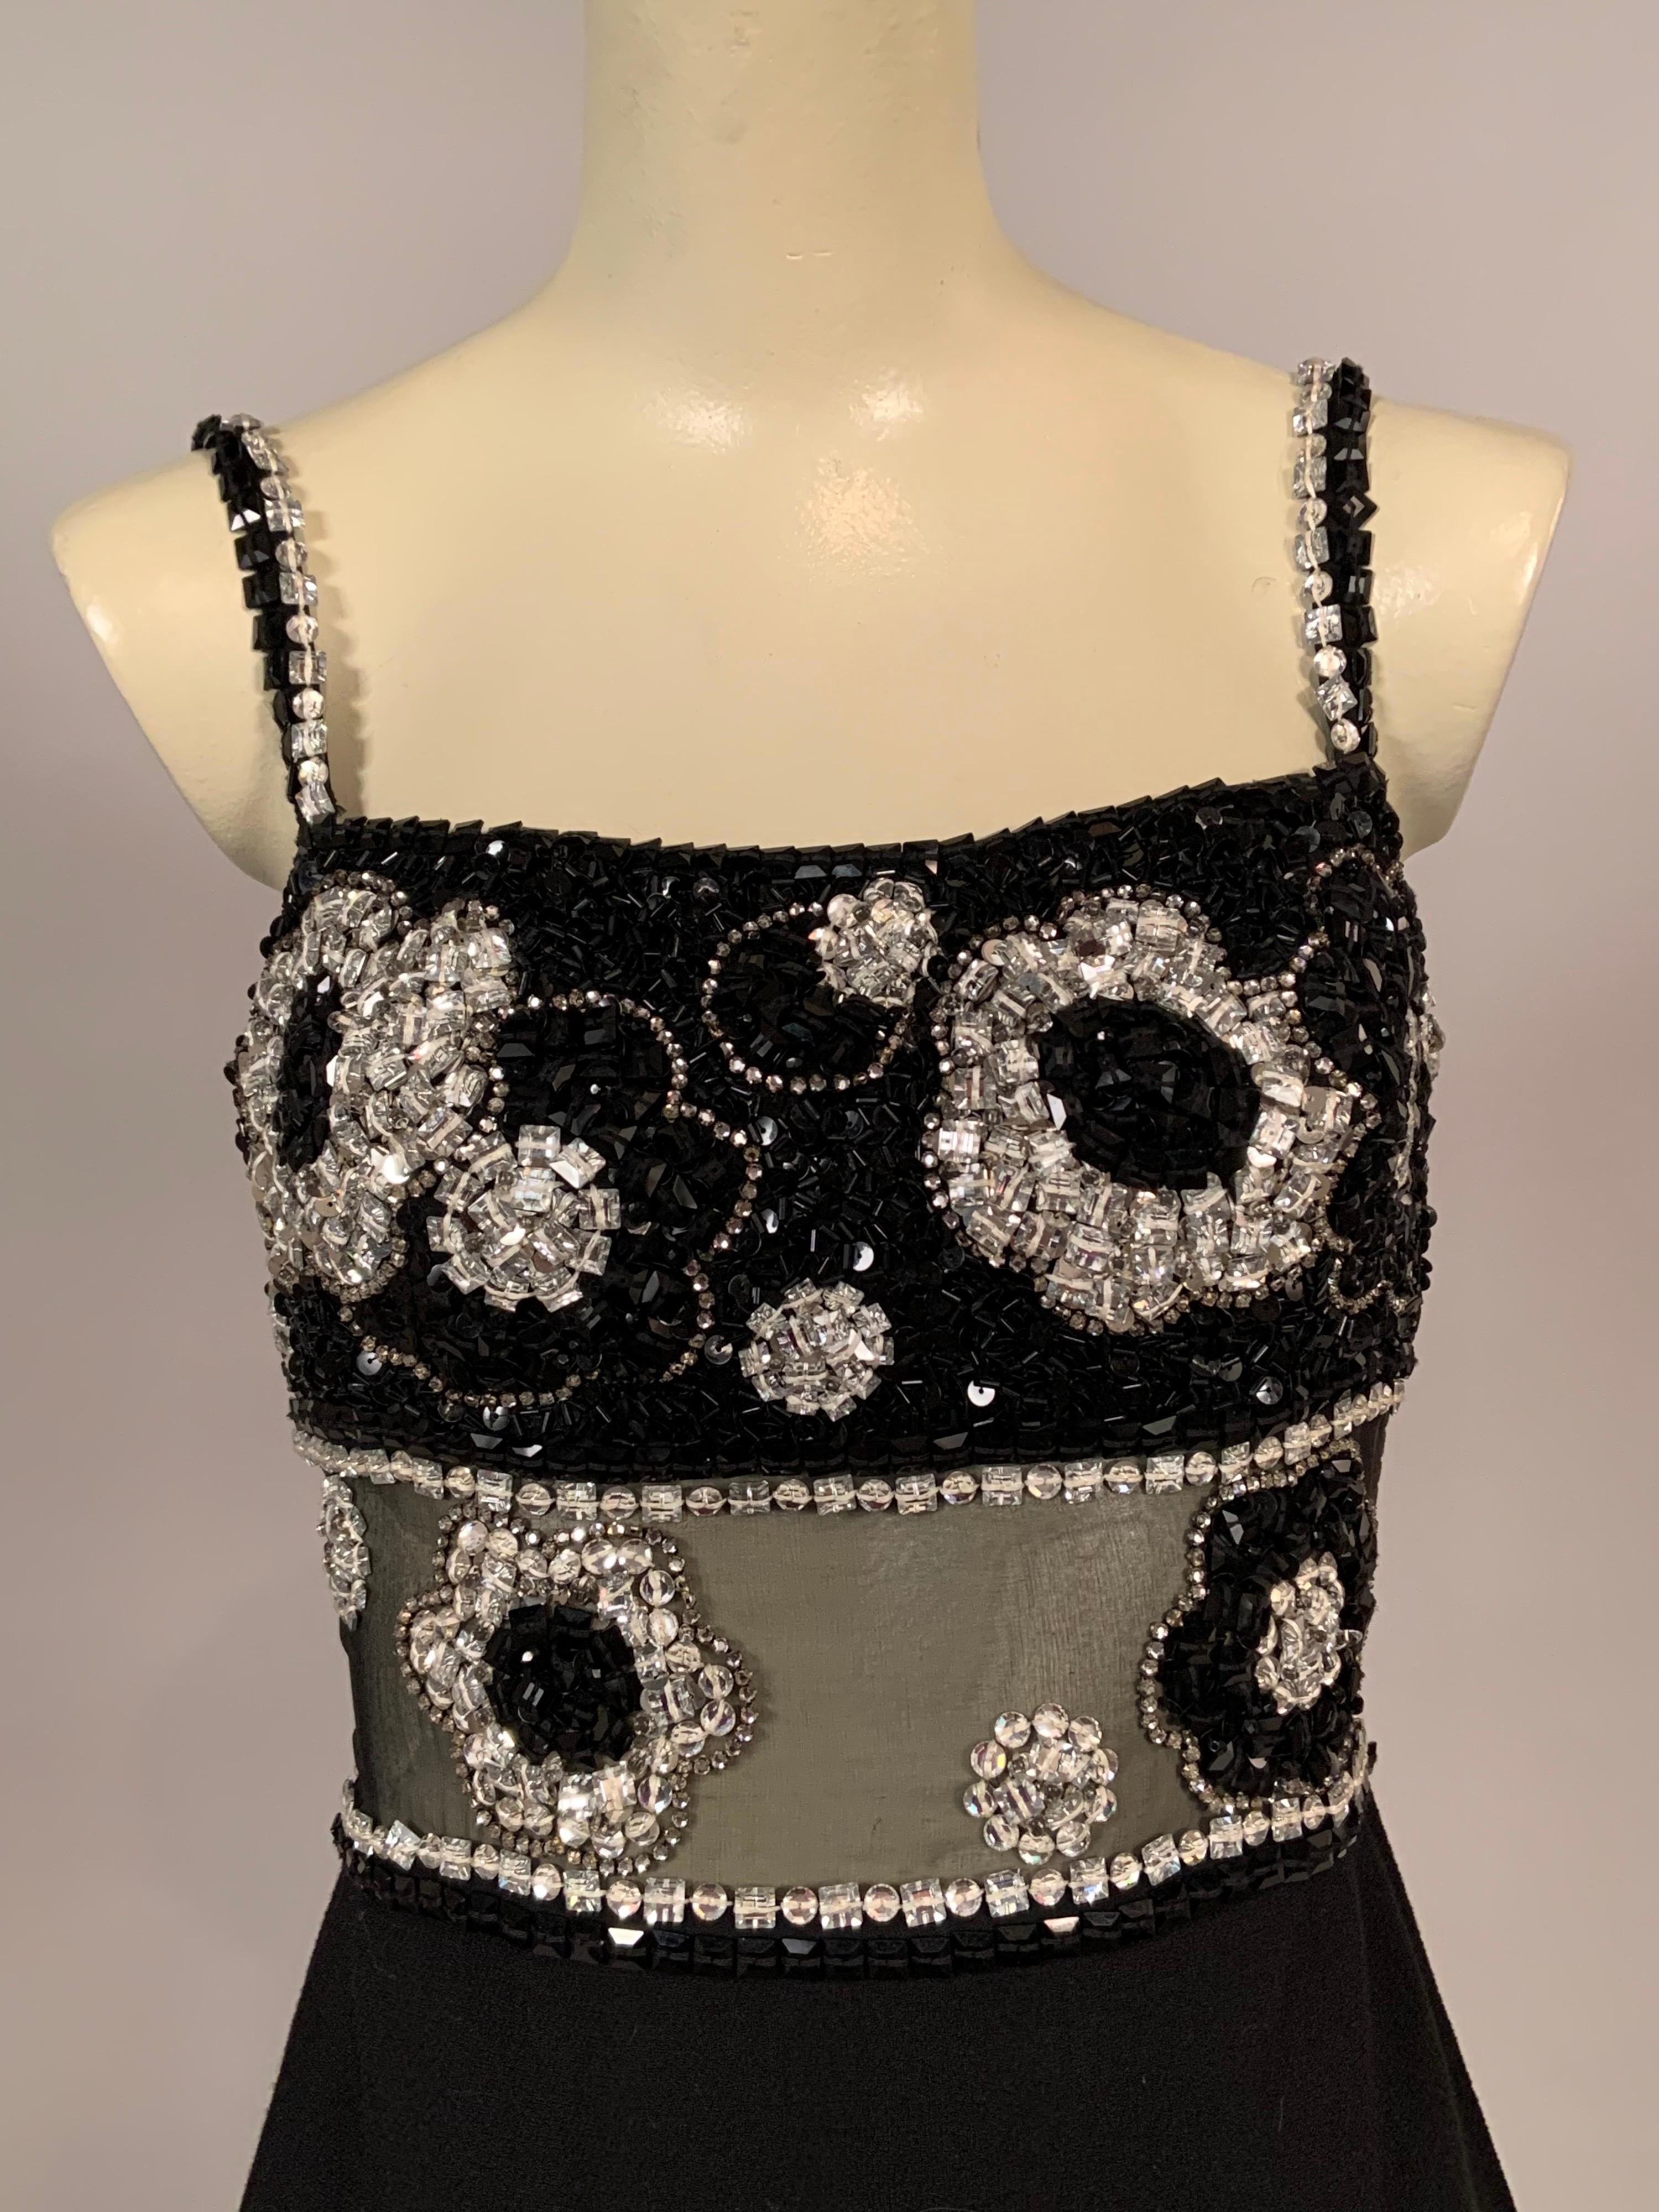 This dress is a stunning example of thr couture level workmanship and design that James Galanos was famous for producing. The dress bodice is encrusted with jewels, clear emerald cut rhinestones, prong set rhinestones, silver sequins, bugle beads,